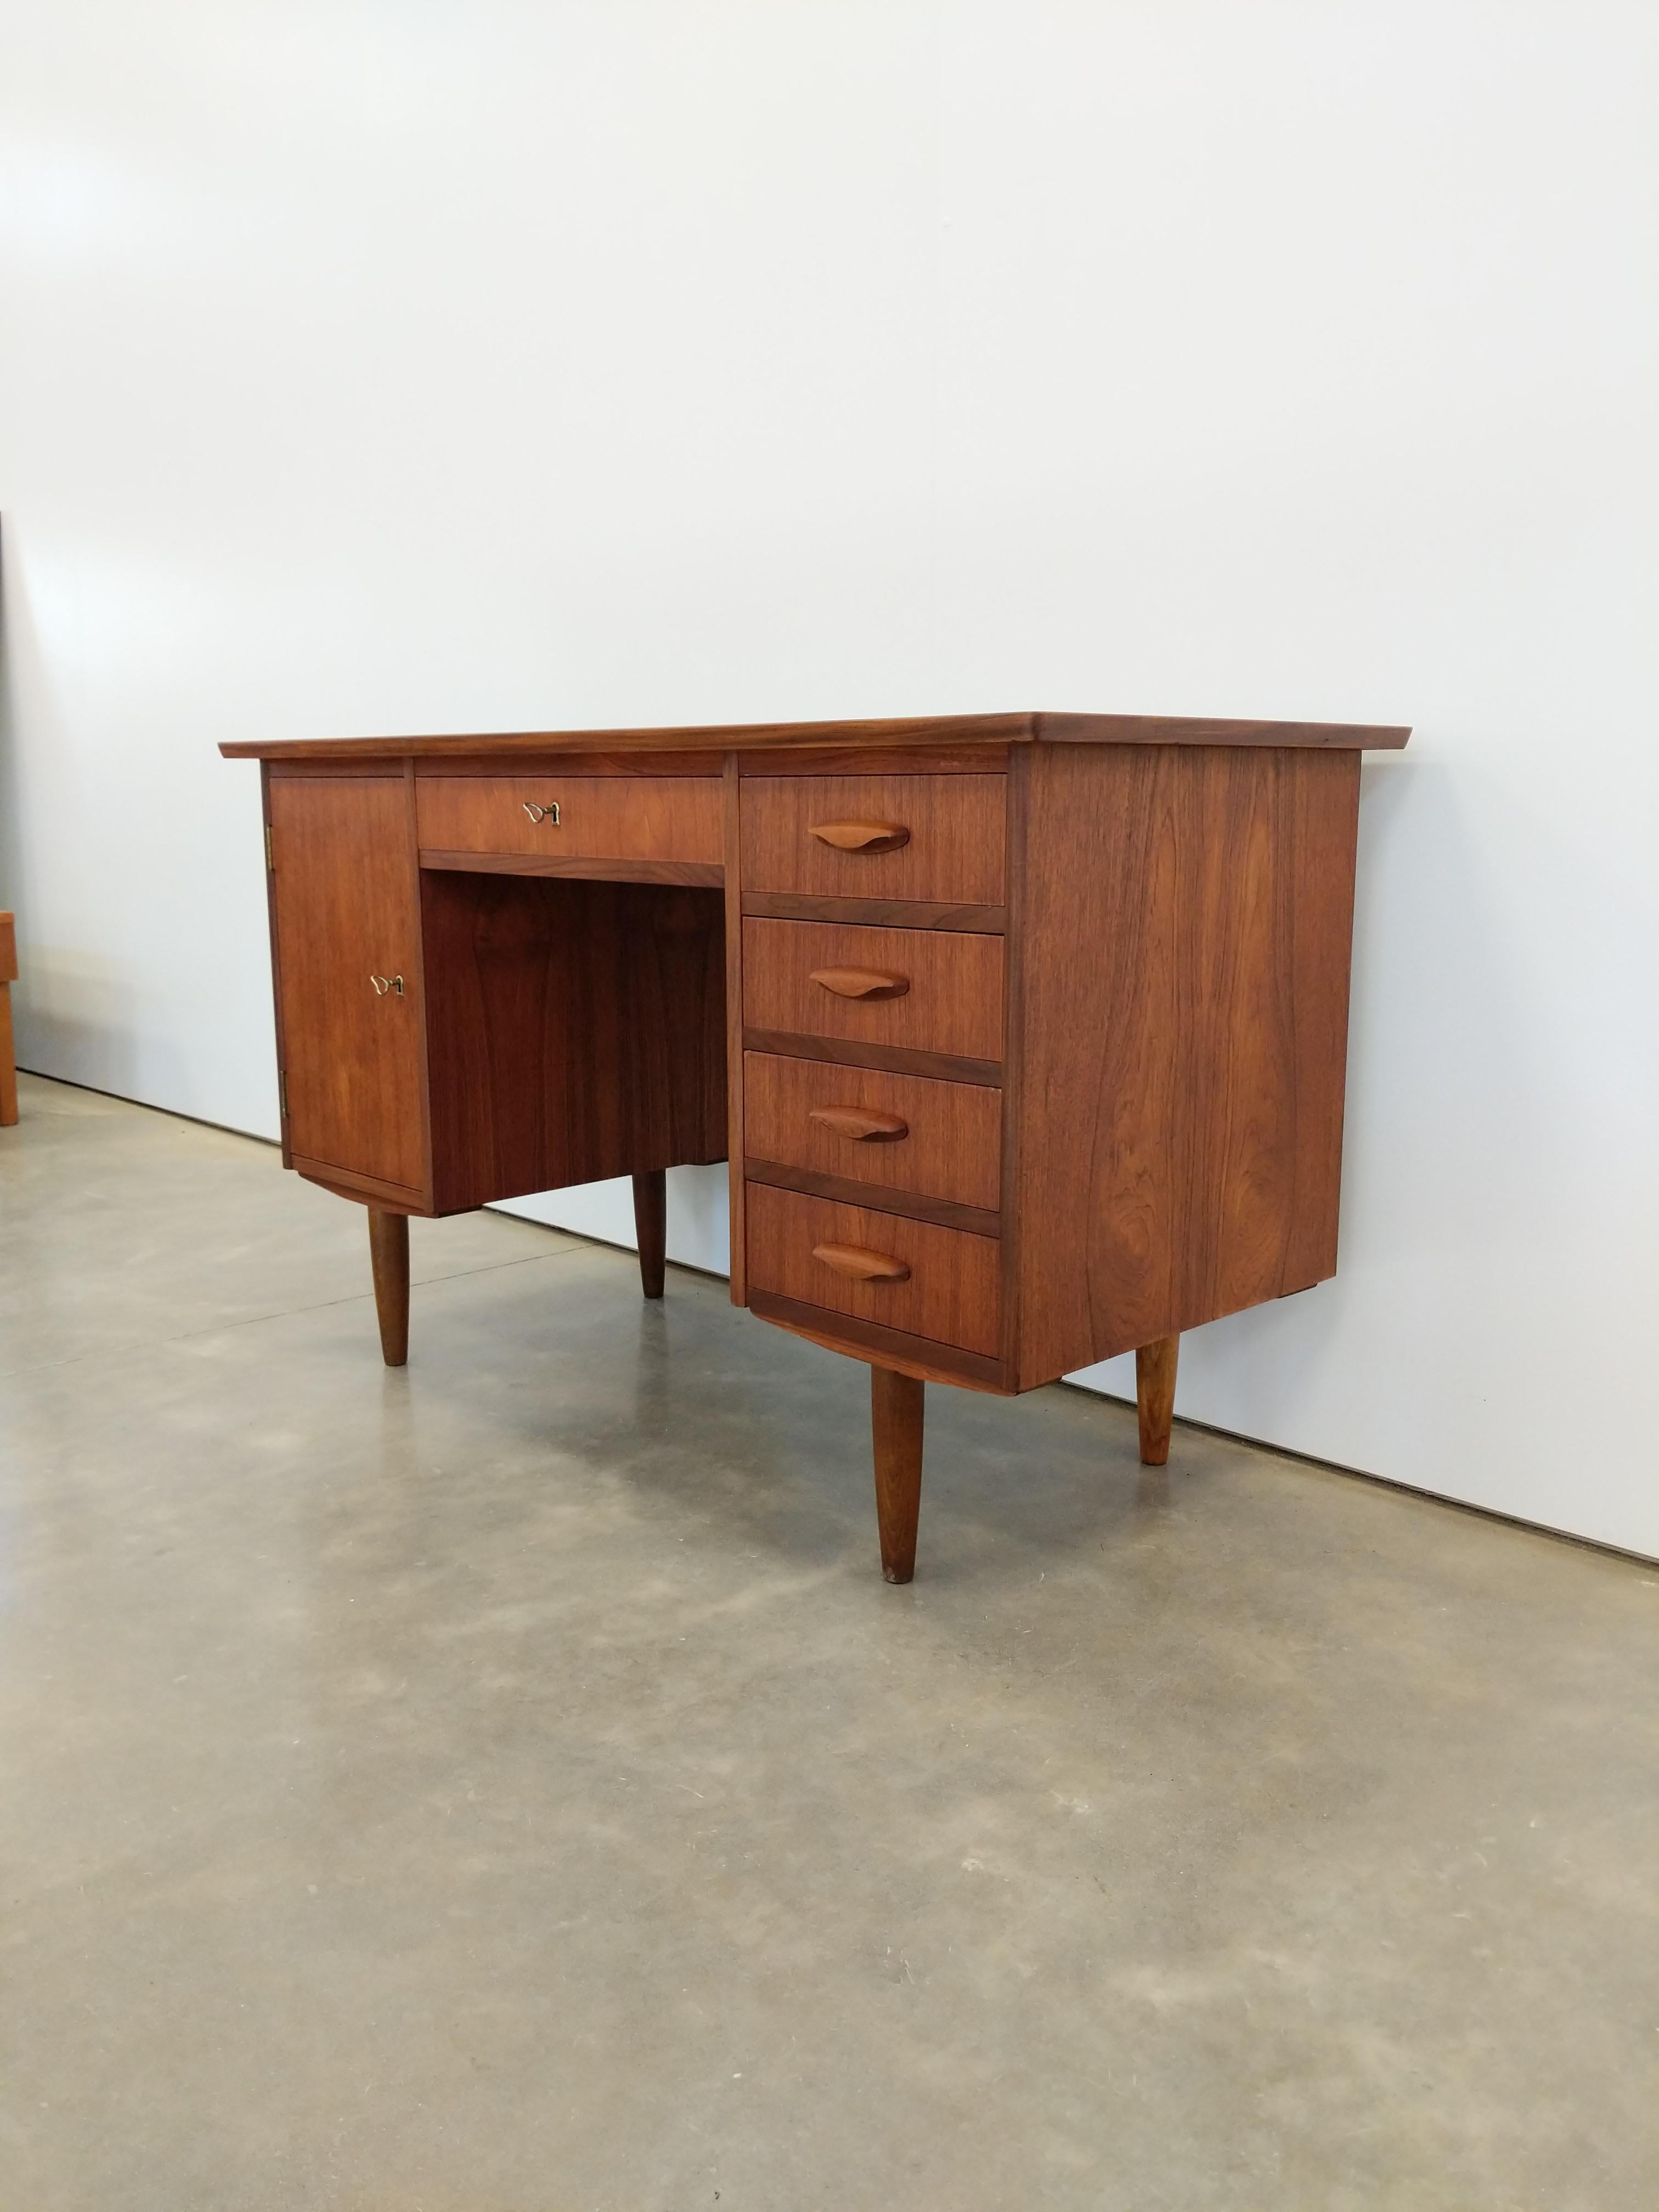 Authentic vintage mid century Danish / Scandinavian Modern teak desk.

This piece is in excellent refinished condition with very few signs of age-related wear (see photos).

If you would like any additional details, please contact